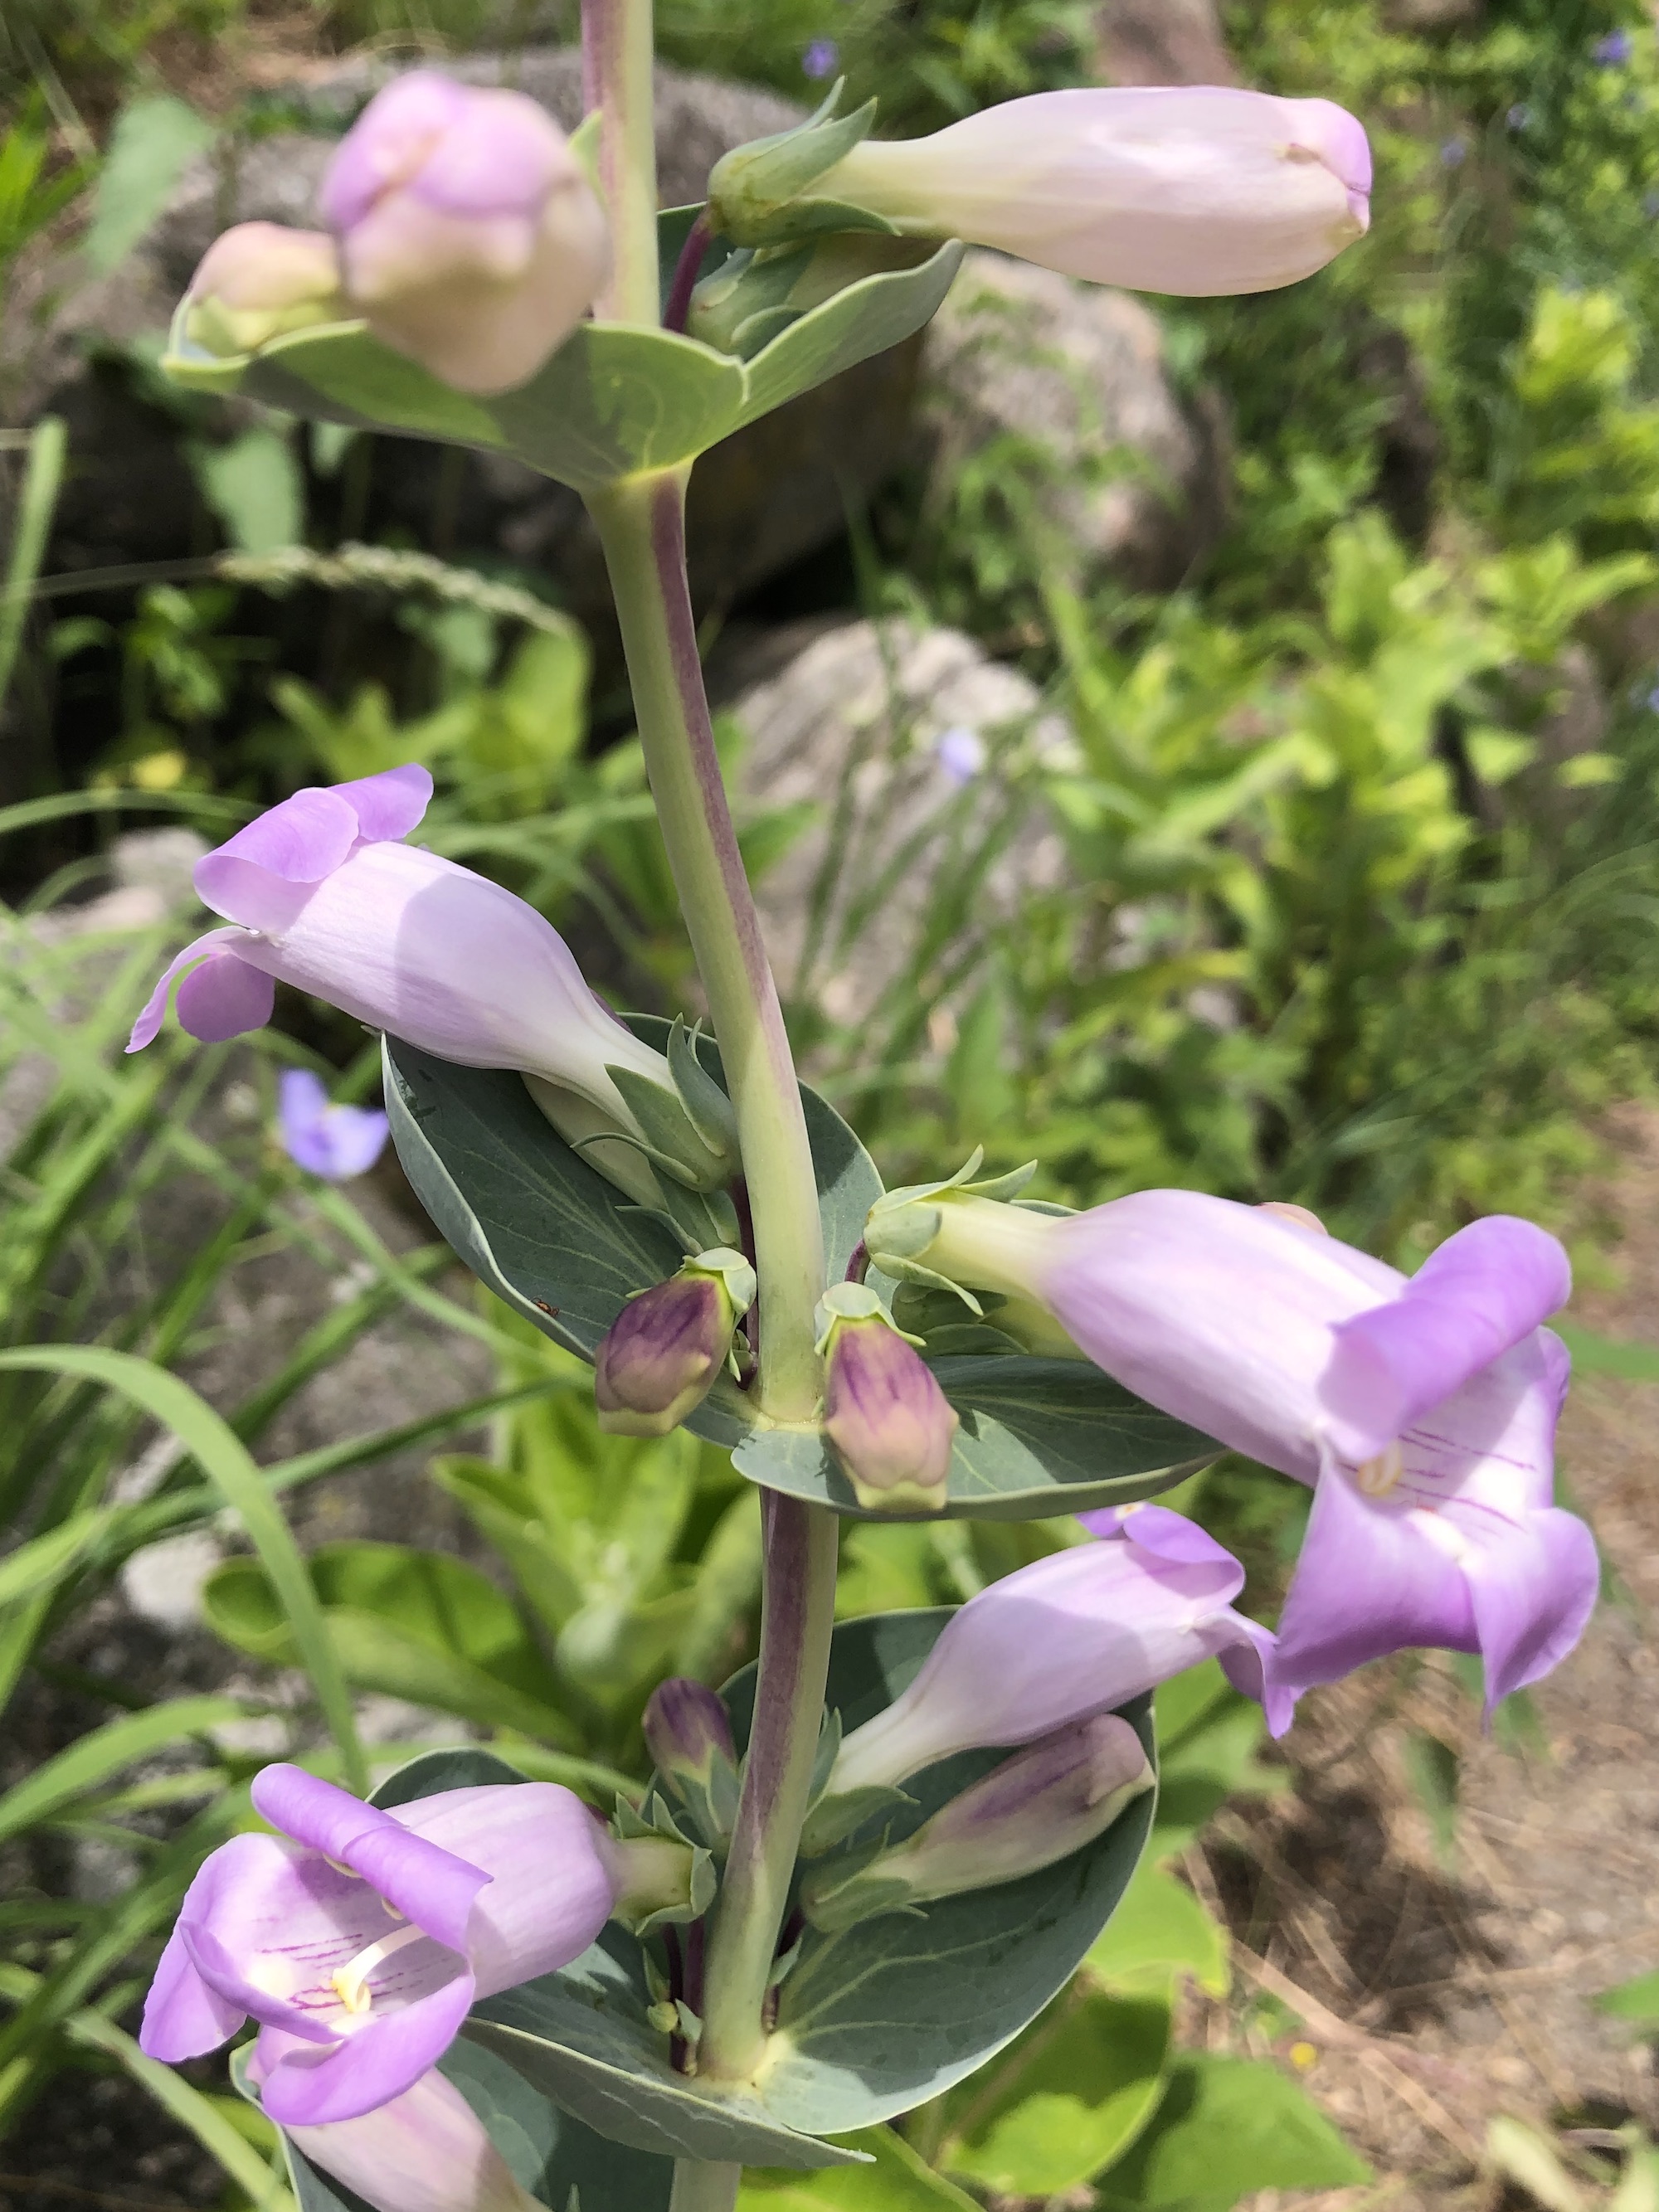 Large Beardtongue in the UW-Madison Arboretum in Madison, Wisconsin on May 31, 2021.